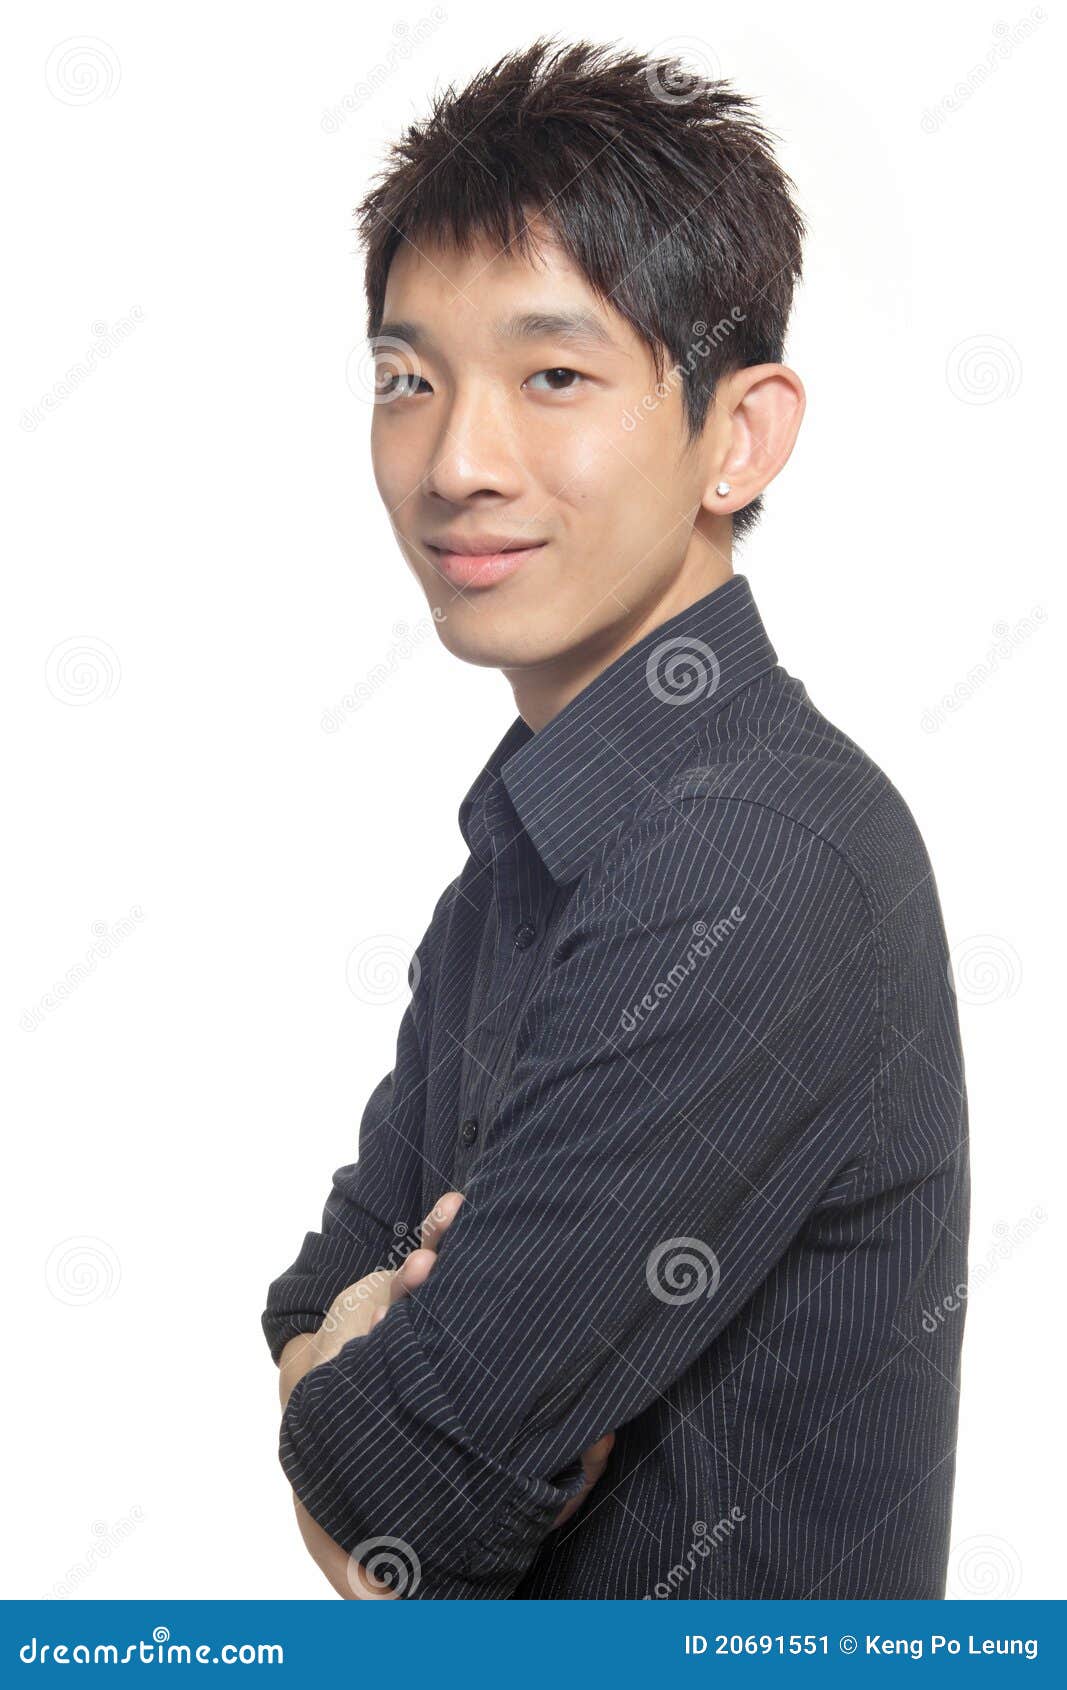 Asia man standing stock image. Image of asia, idea, manager - 20691551